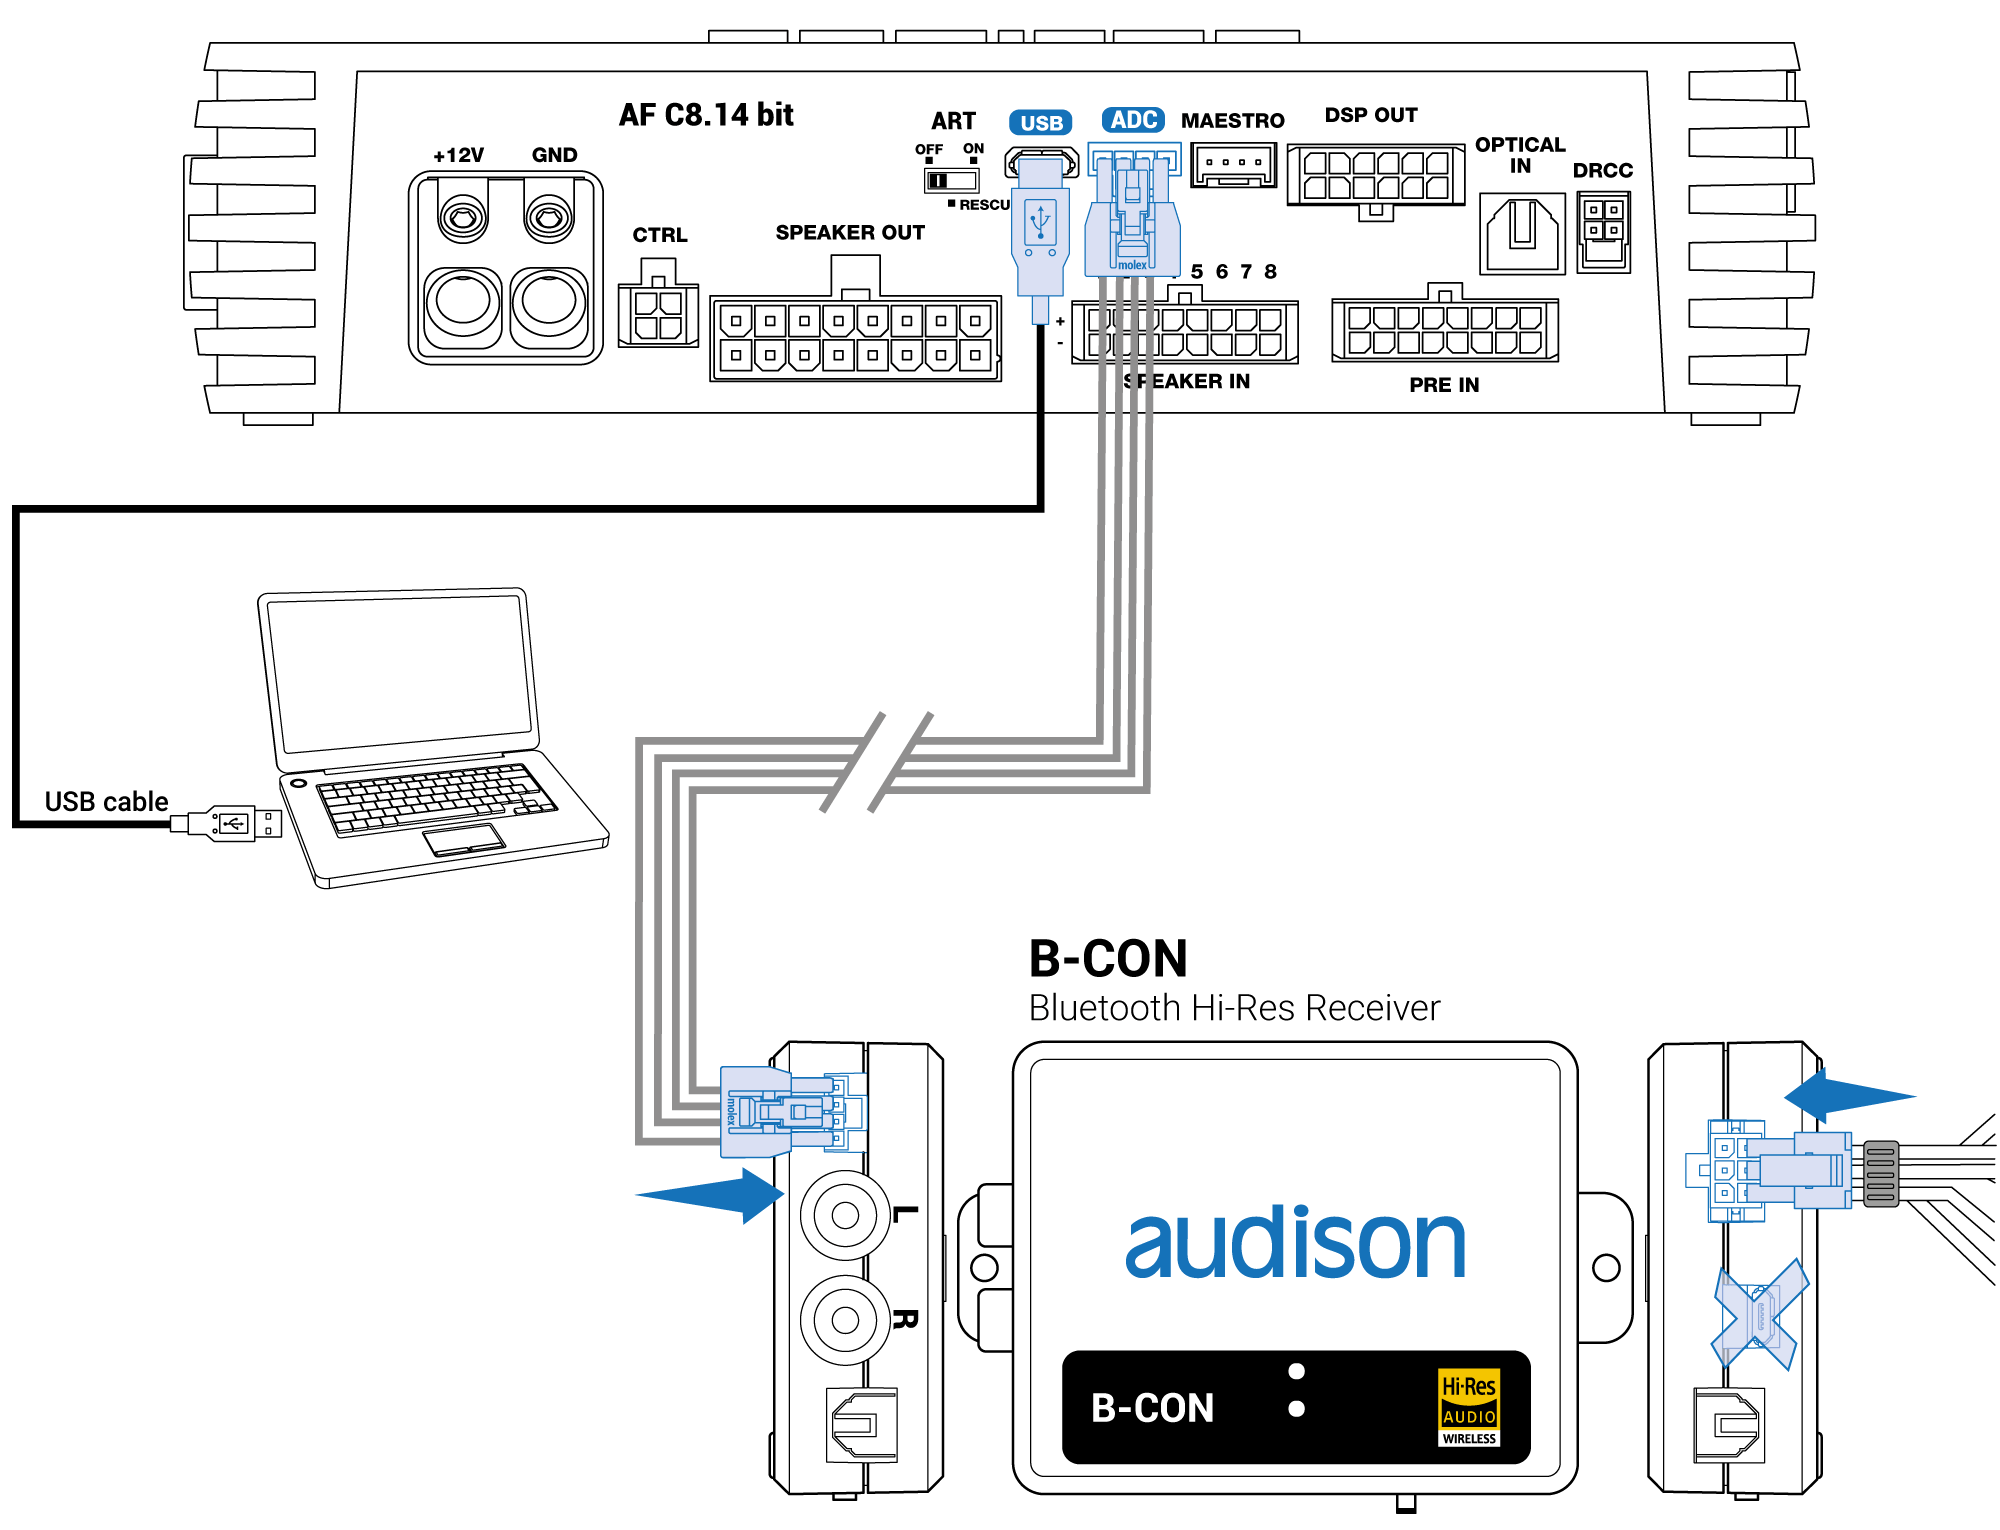 15_Agg.-FW-B-CON-AF-BIT_cavo-usb-to-ADC-copia.png